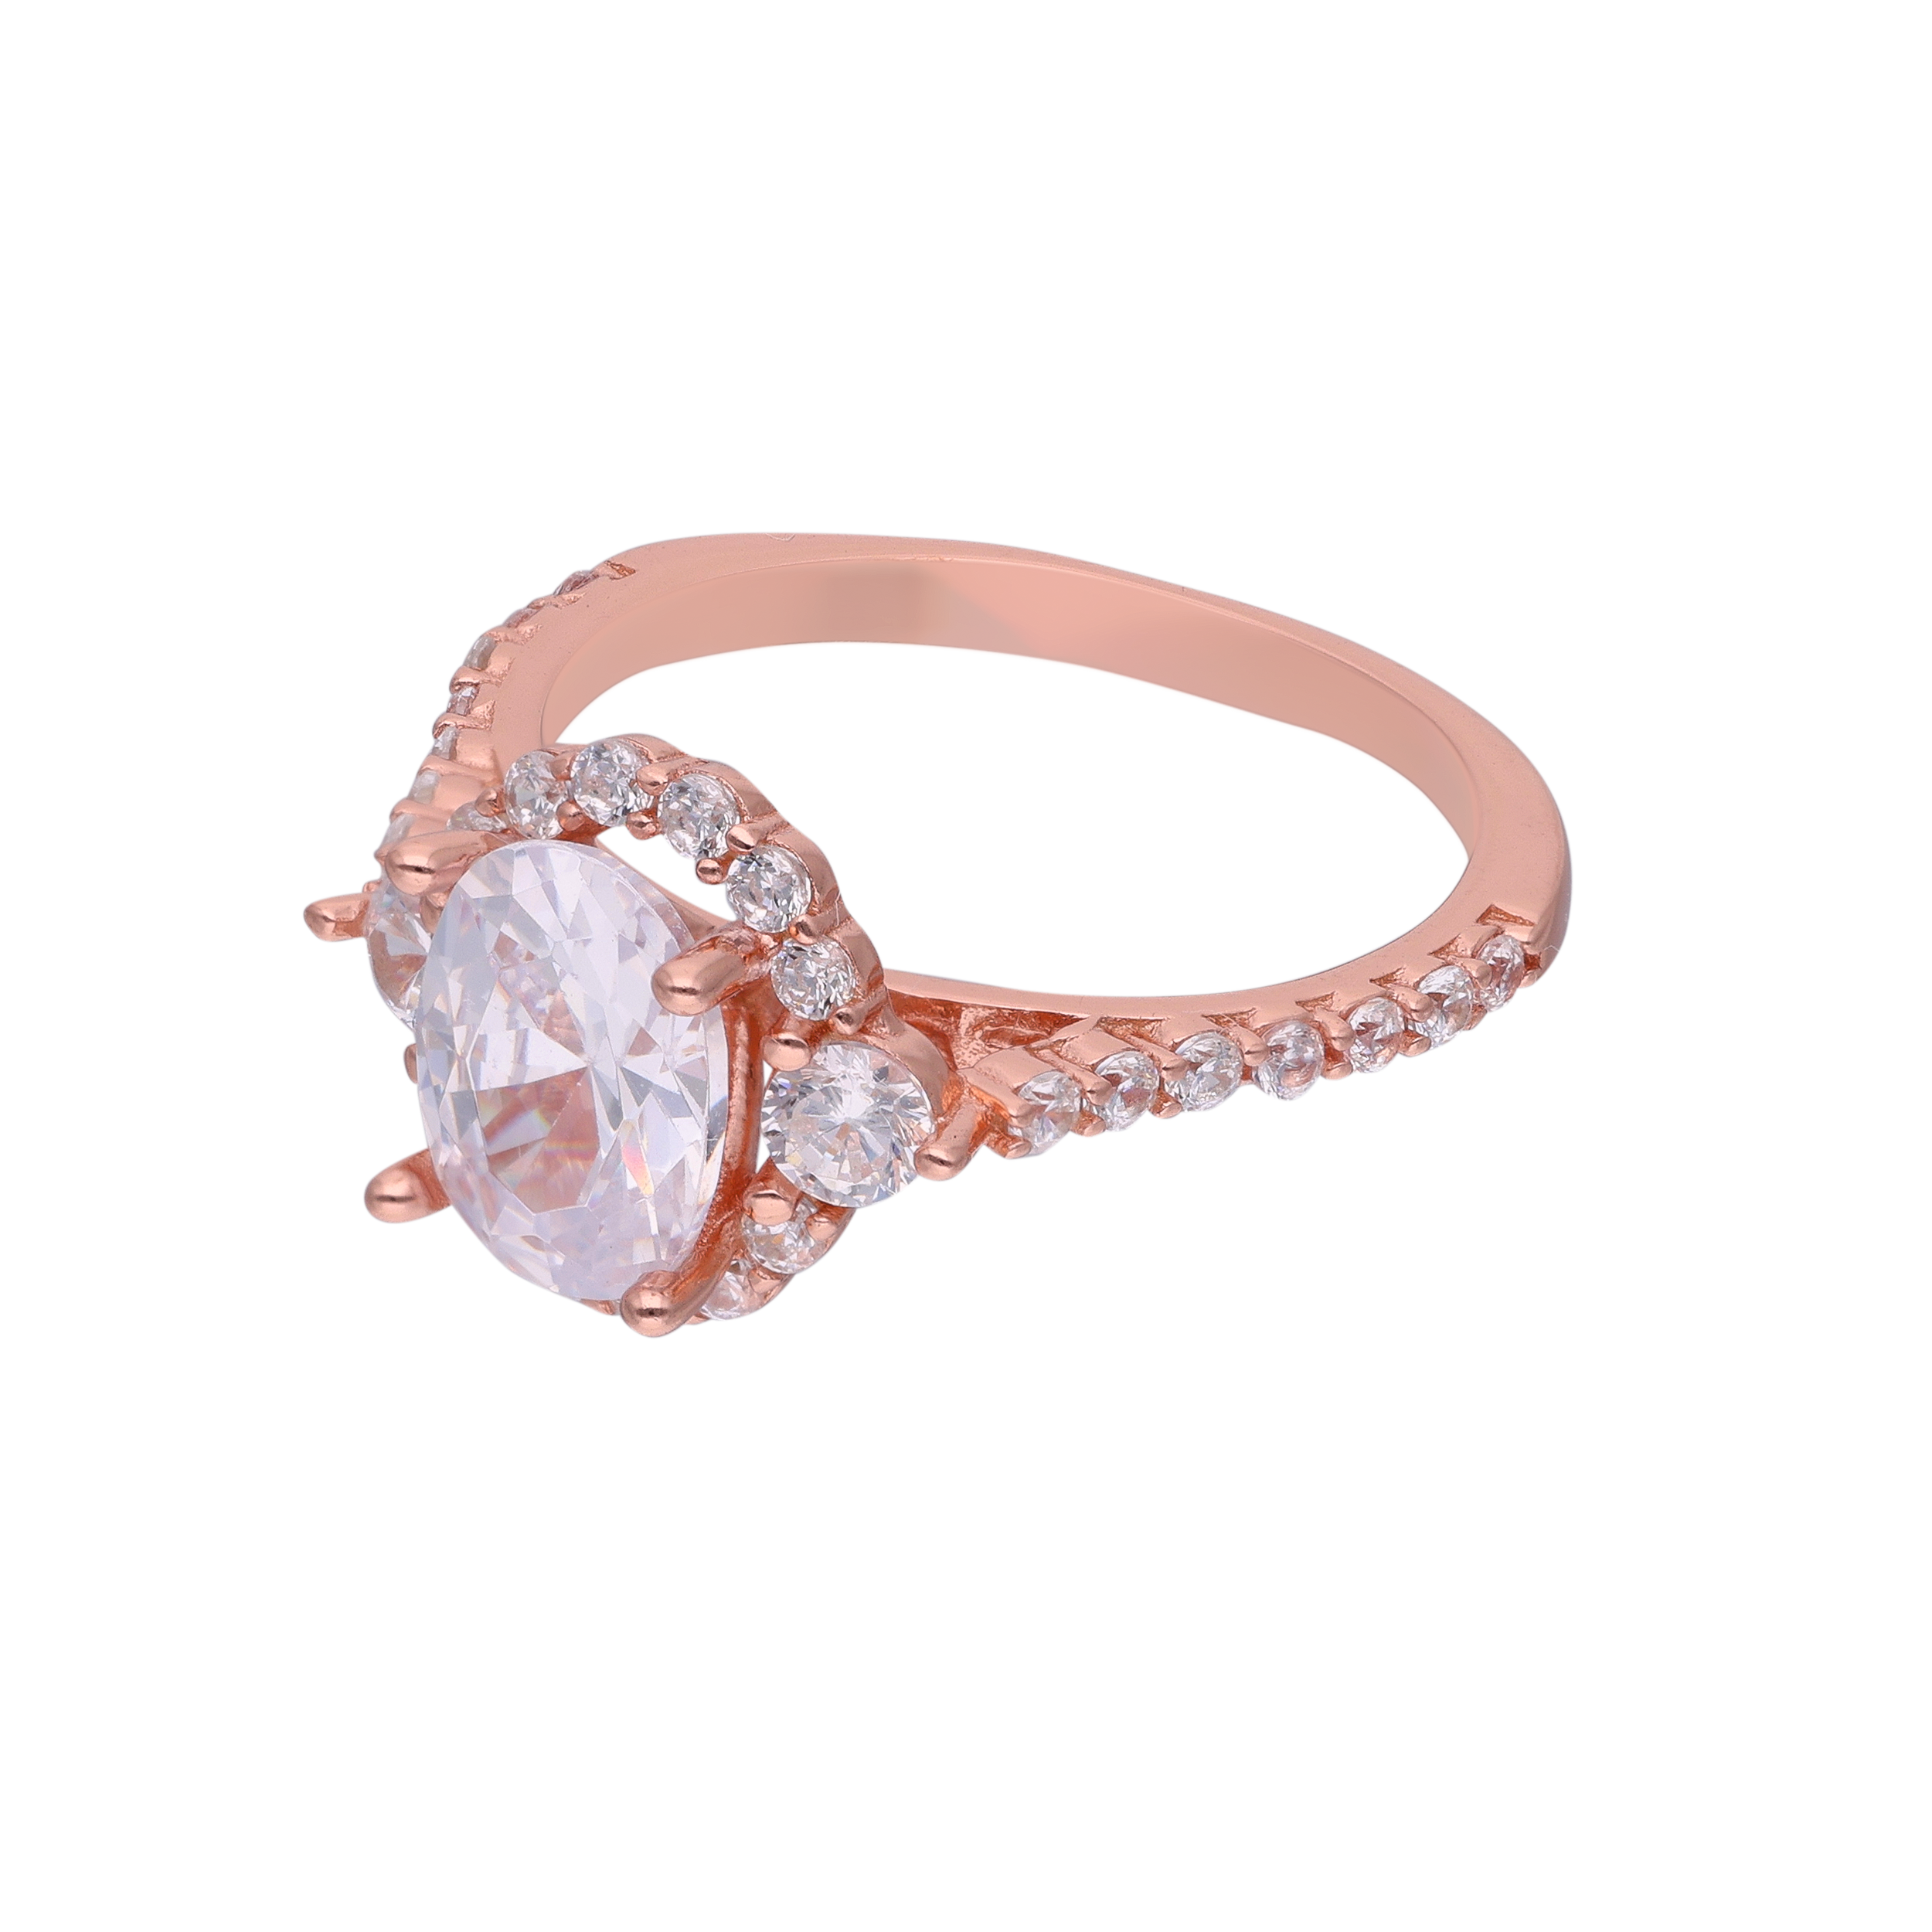 Embedded Stone Solitaire Ring | SKU: 0019211992, 0019211329, 0019212081, 0019212142